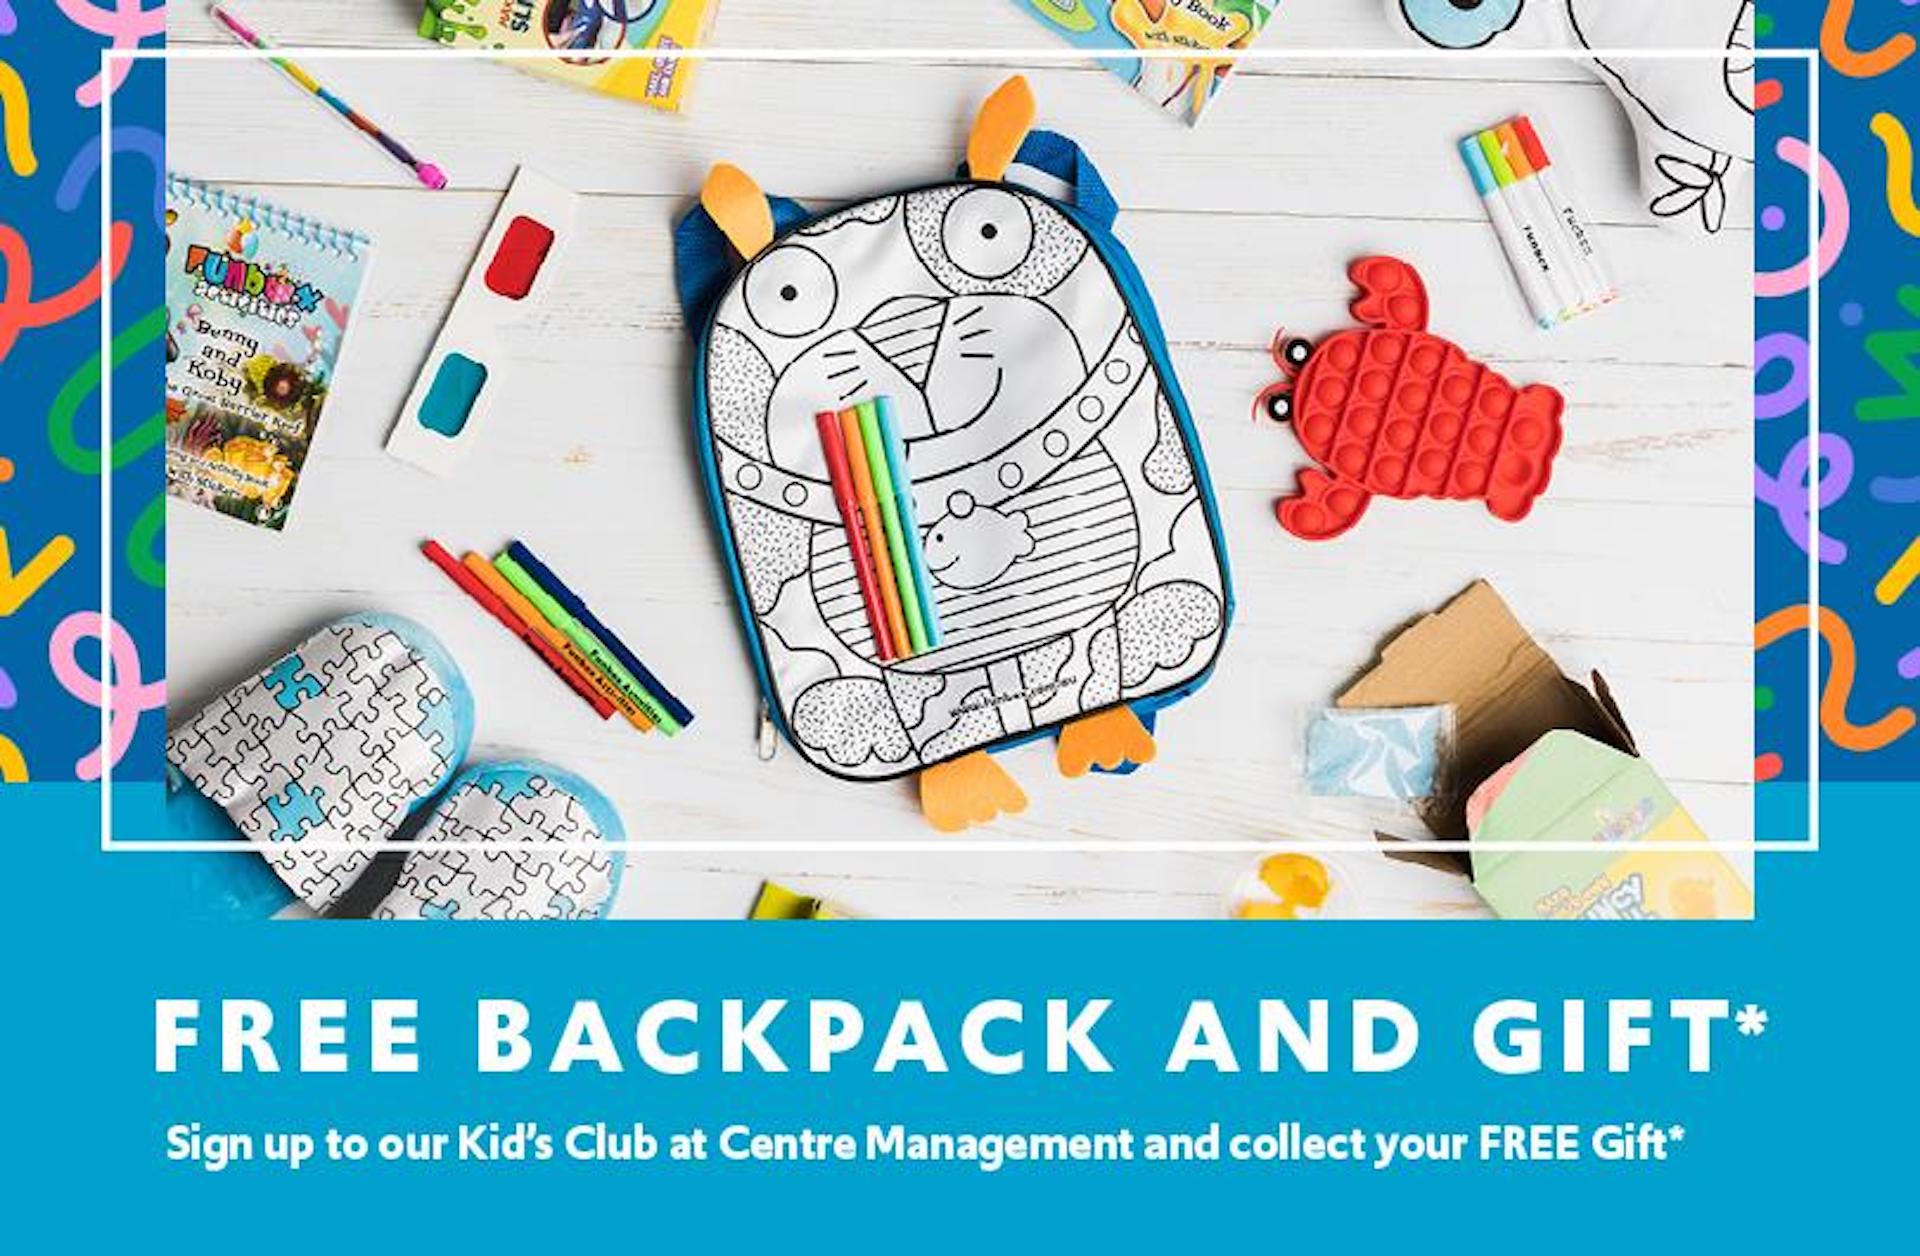 Free back pack and gift